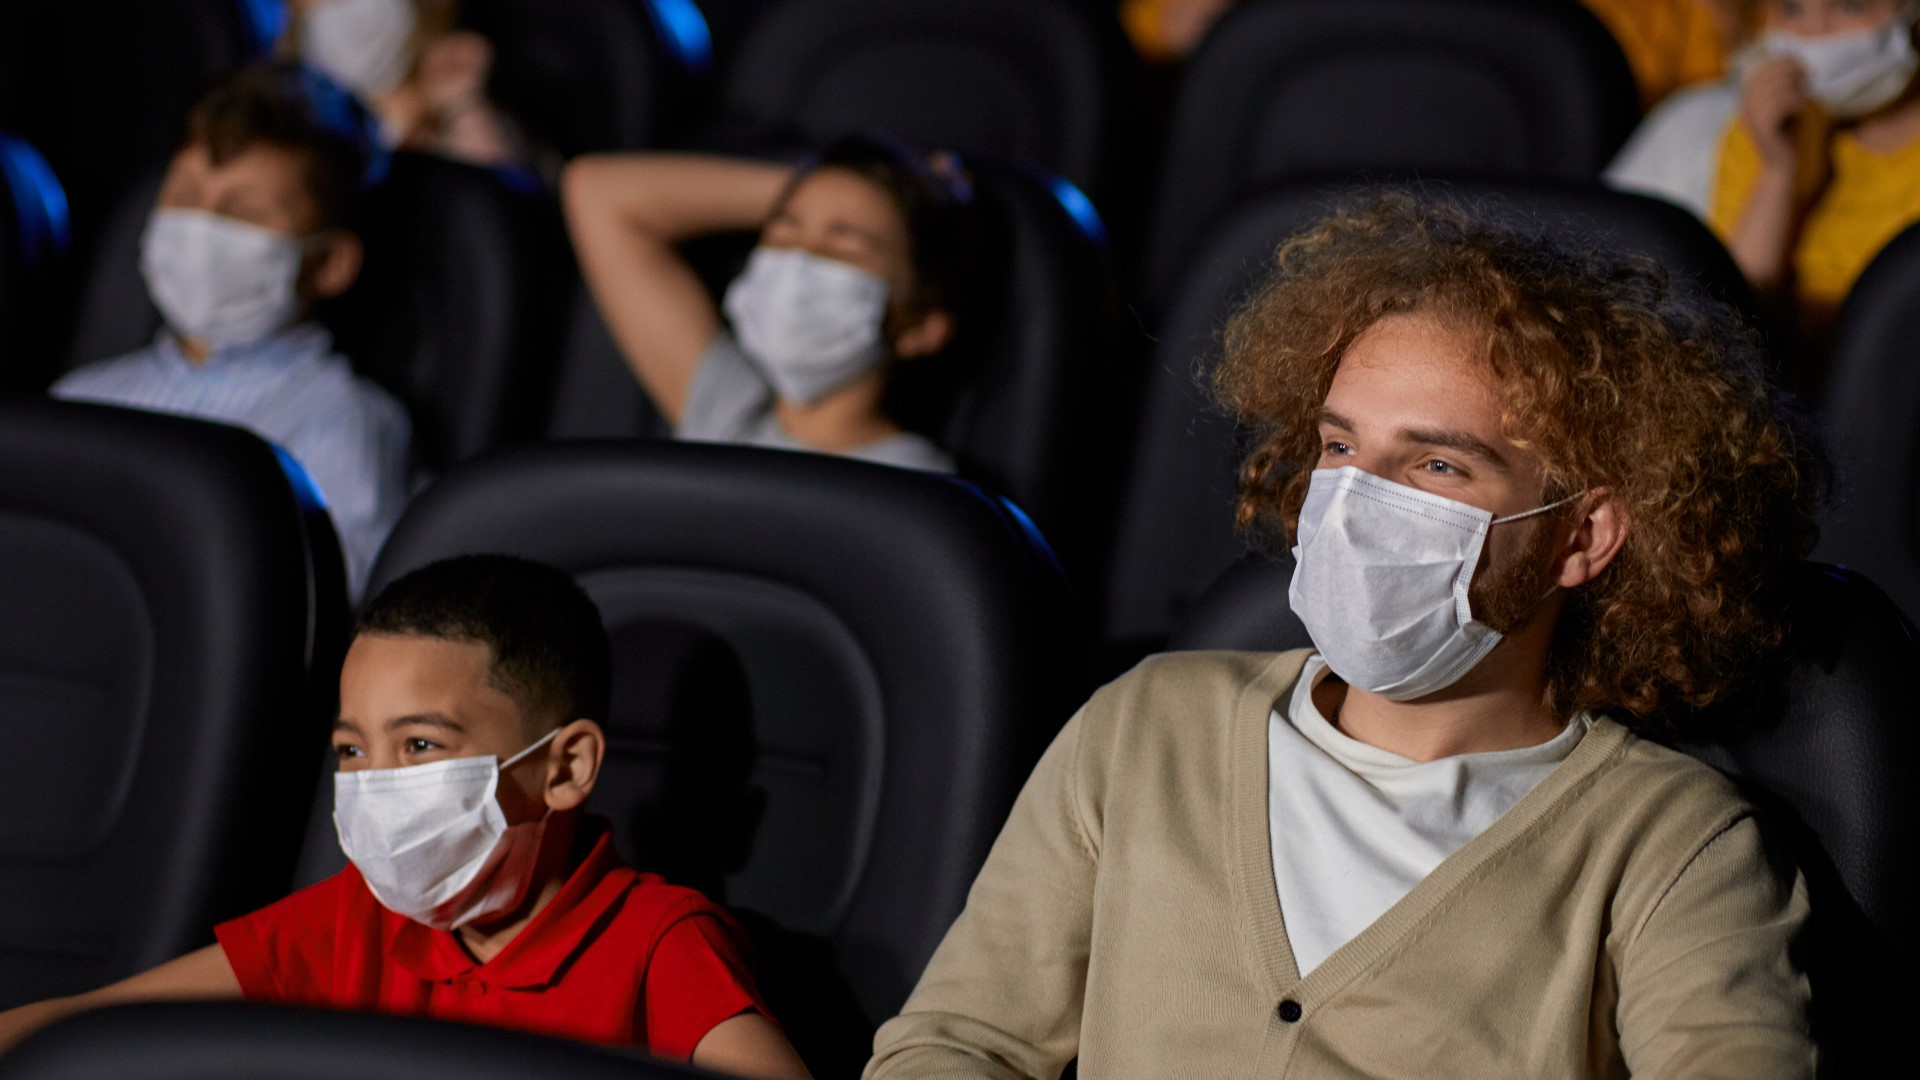 Safe cinema protocol is in place at all locations to ensure proper sanitizing and social distancing.